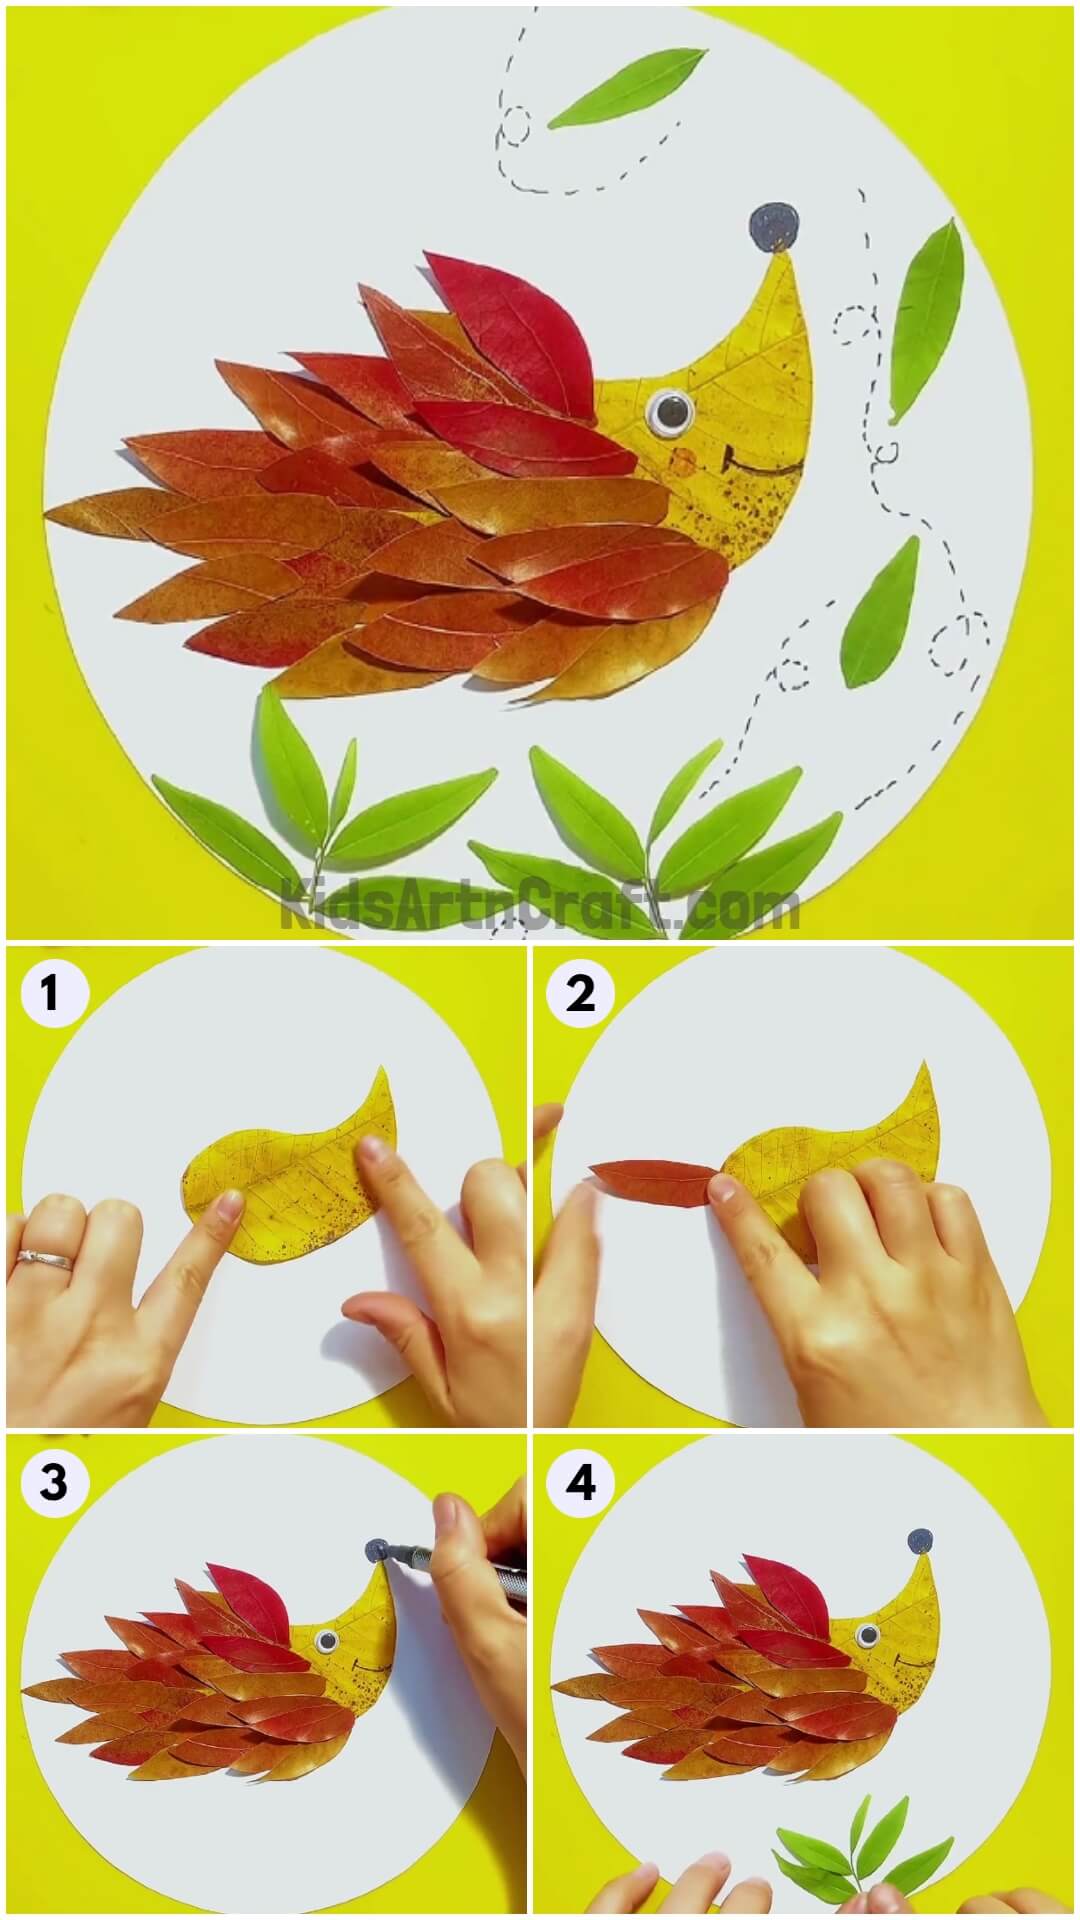  Creative Hedgehog Craft From Fall Leaves Tutorial For Beginners